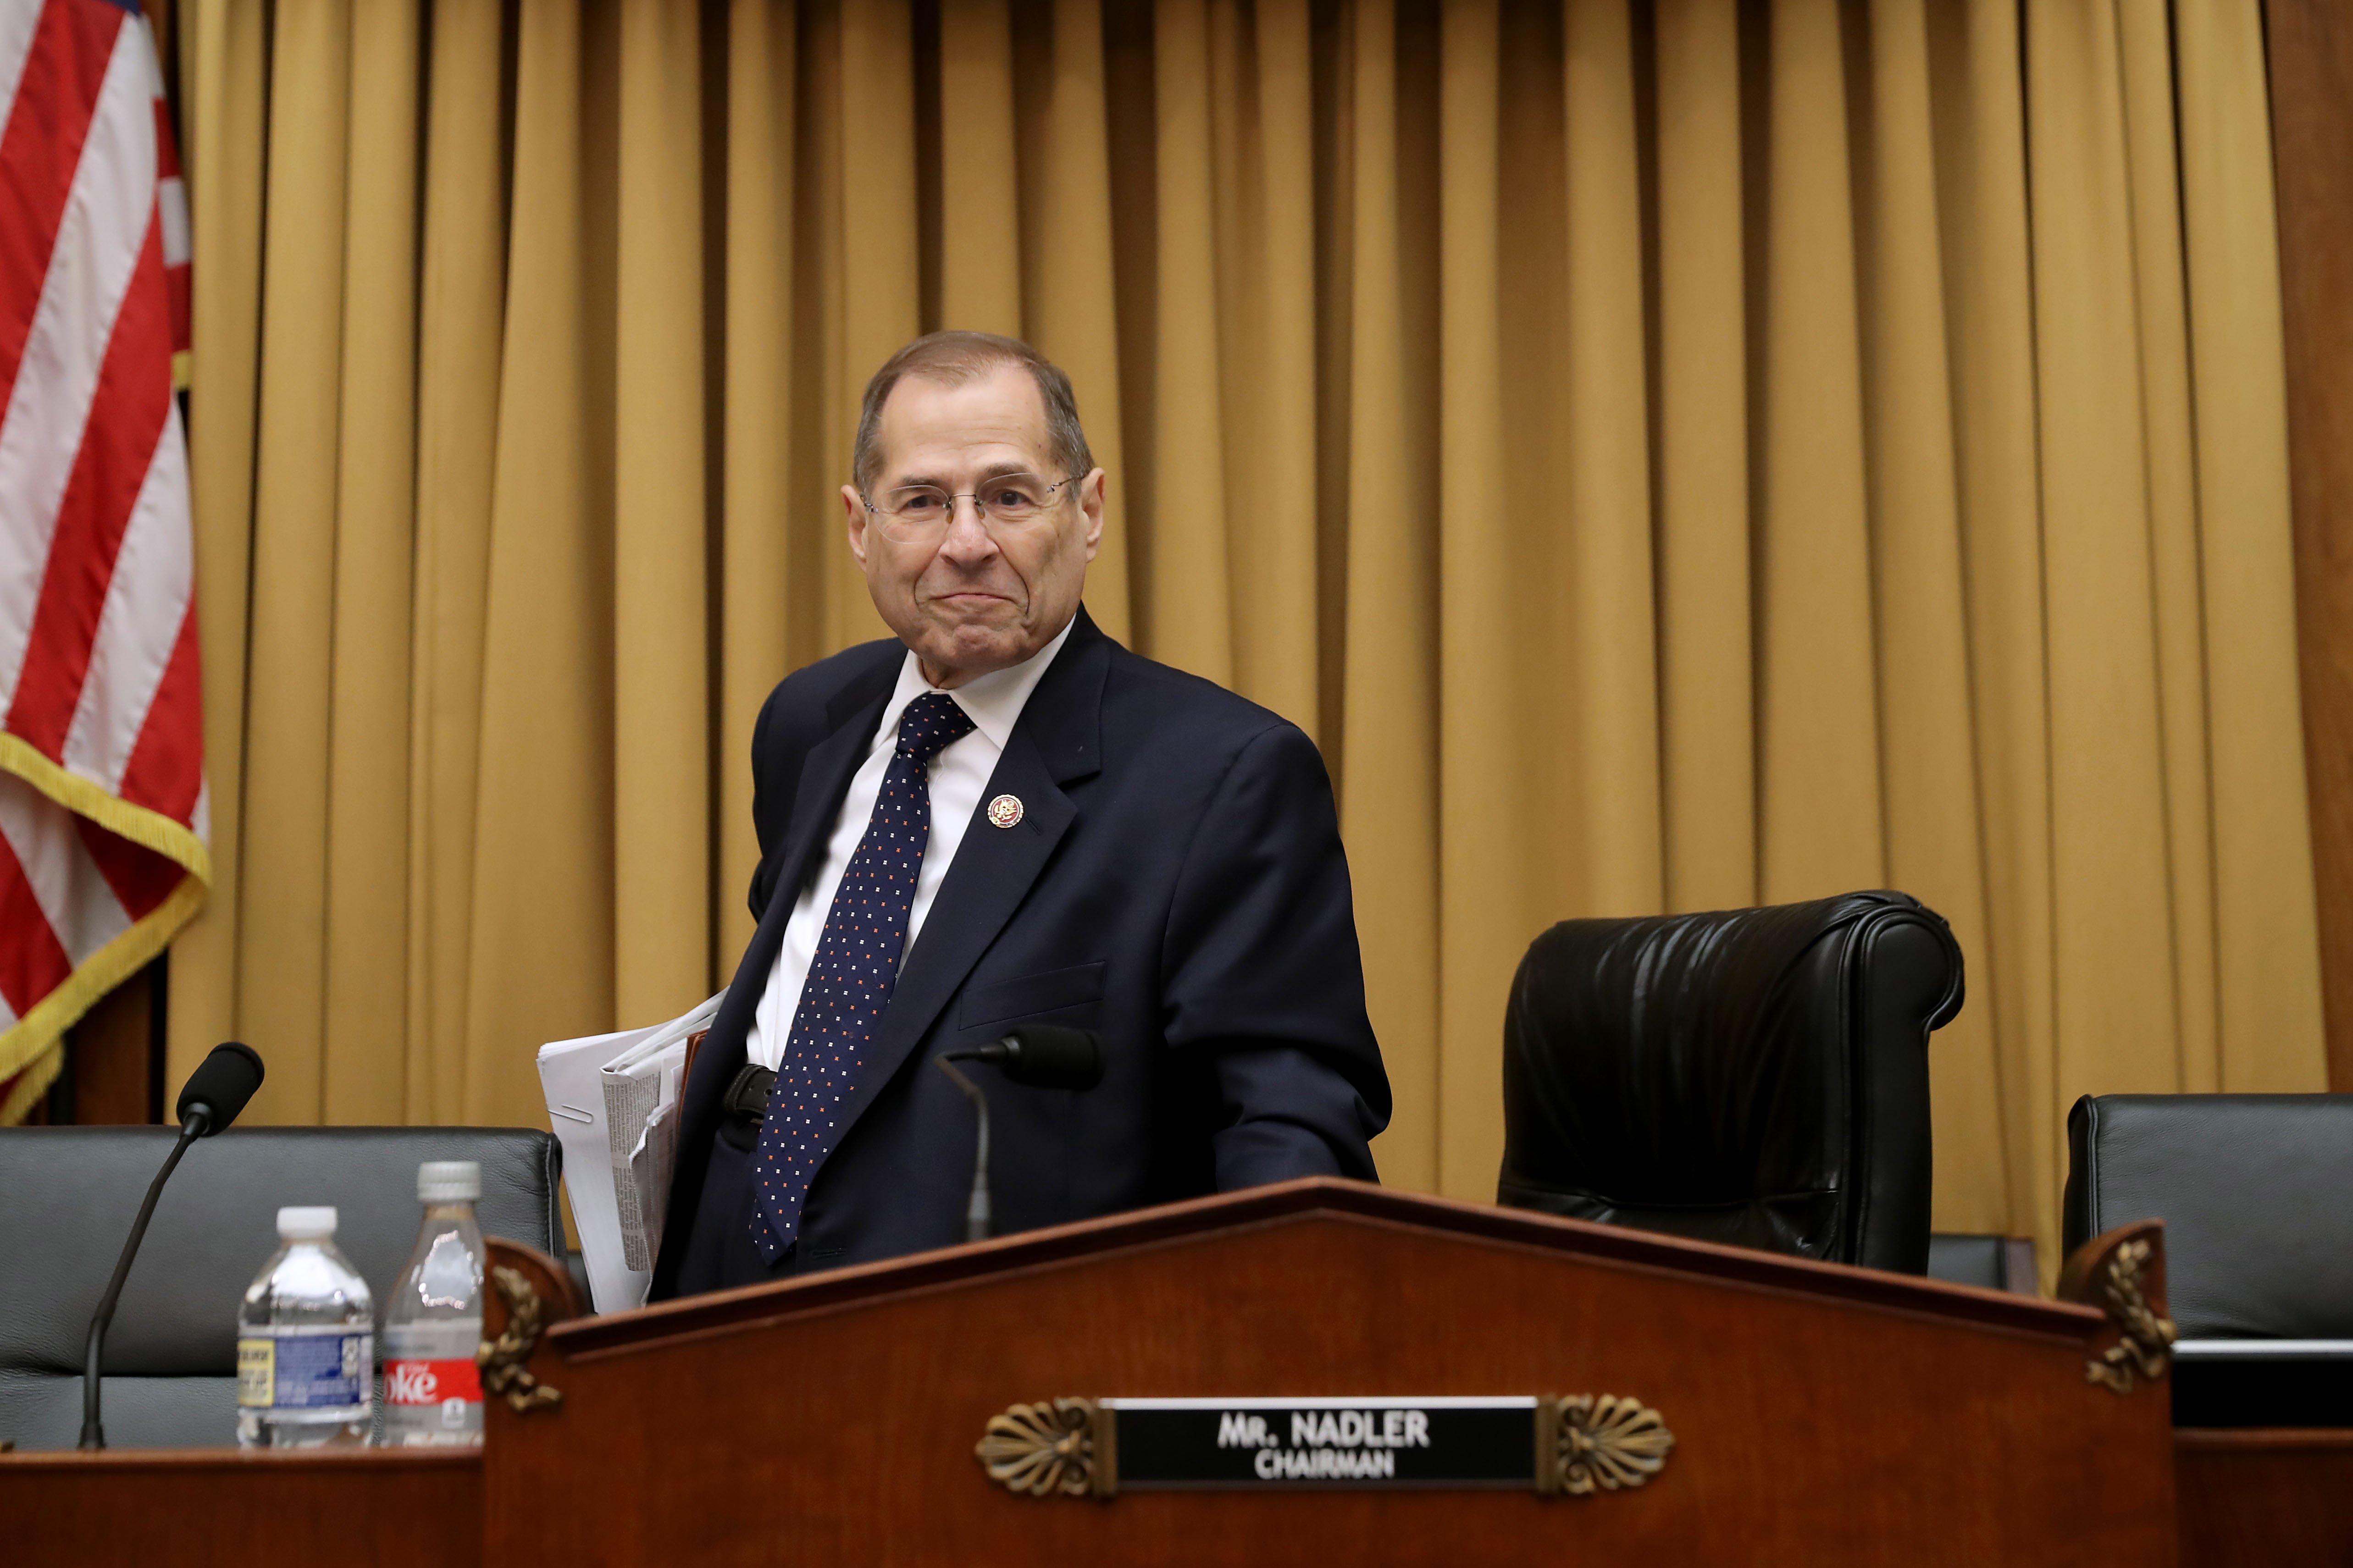 House Judiciary Committee chairman Jerry Nadler (D-NY) leaves after the committee voted to hold Attorney General William Barr in contempt of Congress for not providing an un-redacted copy of special prosecutor Robert Mueller's report. (Chip Somodevilla/Getty Images)